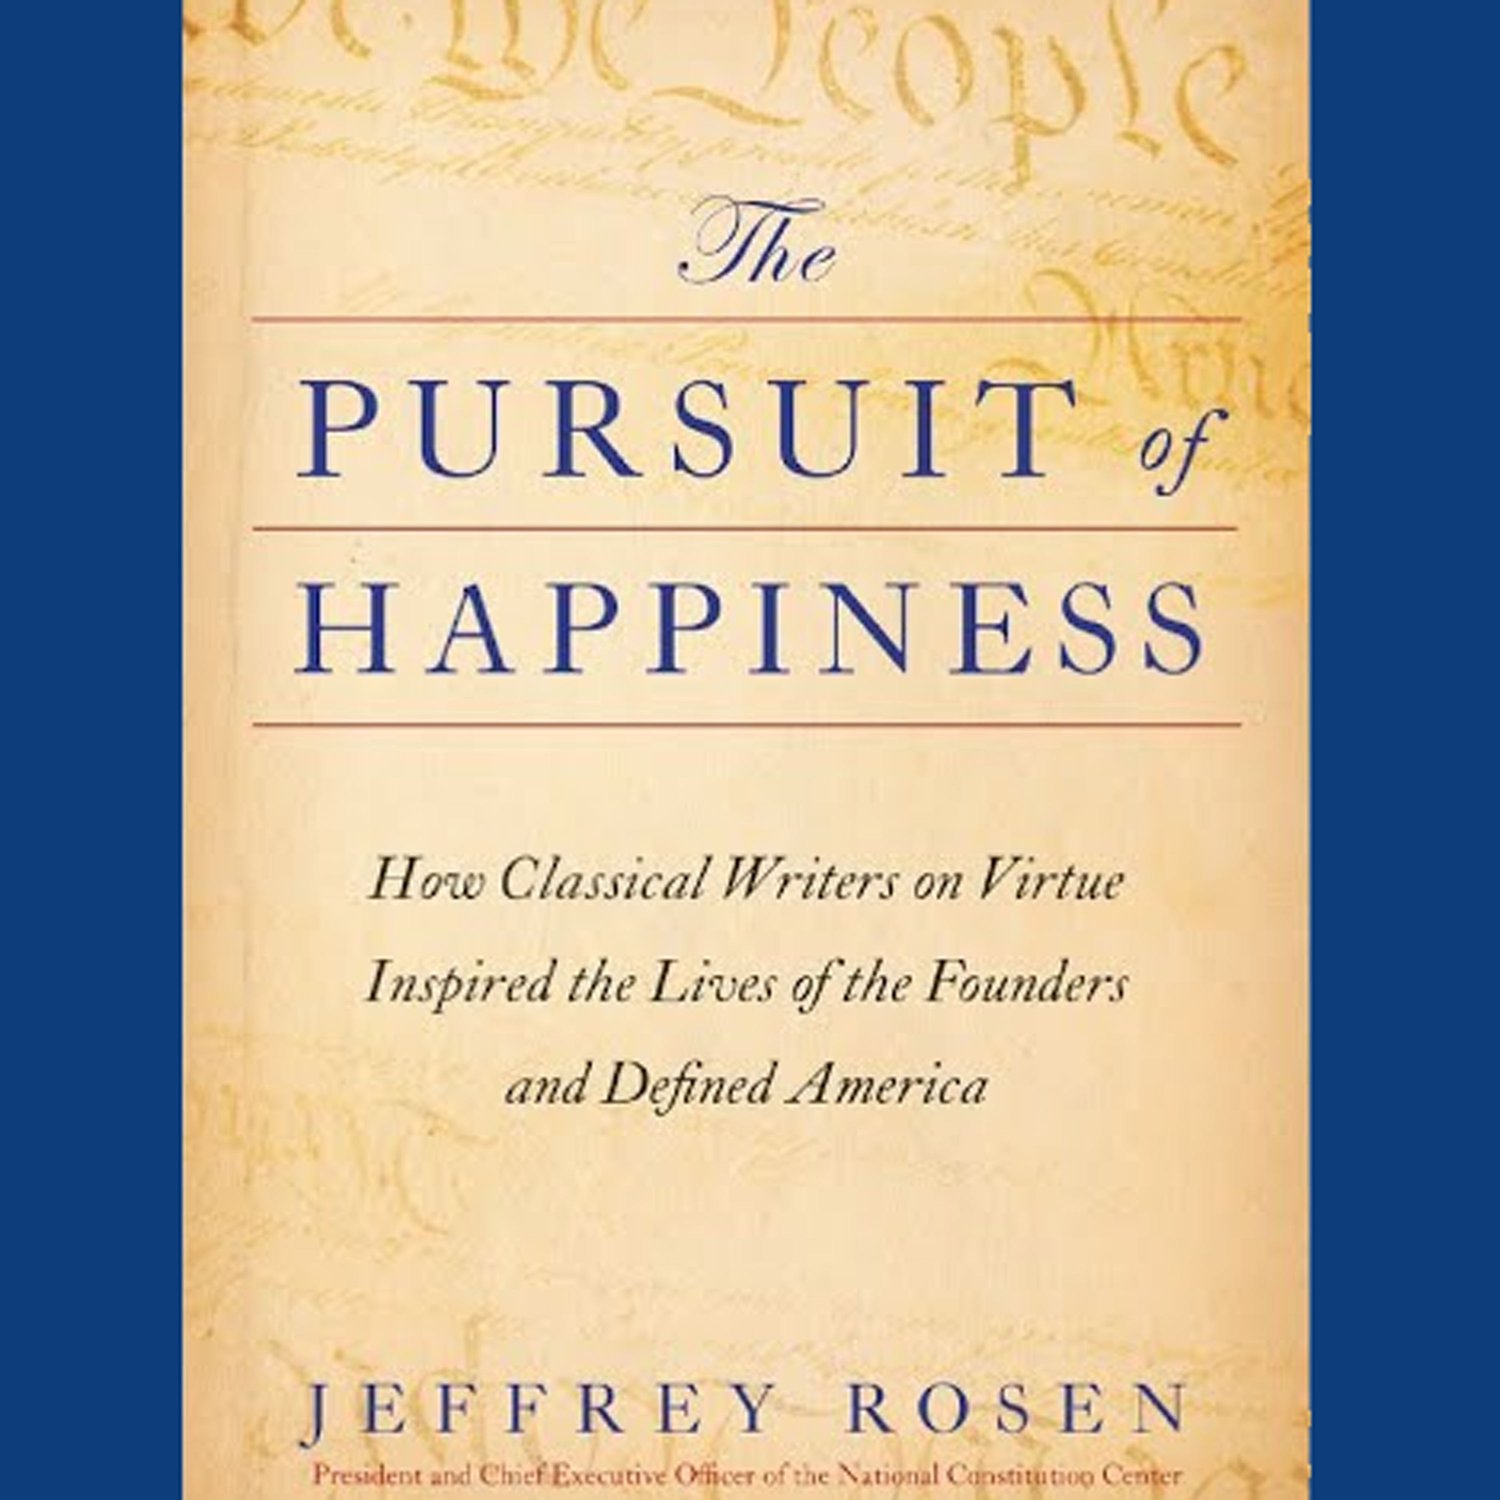 The Pursuit of Happiness - JEFFREY ROSEN - President & CEO of the National Constitution Center